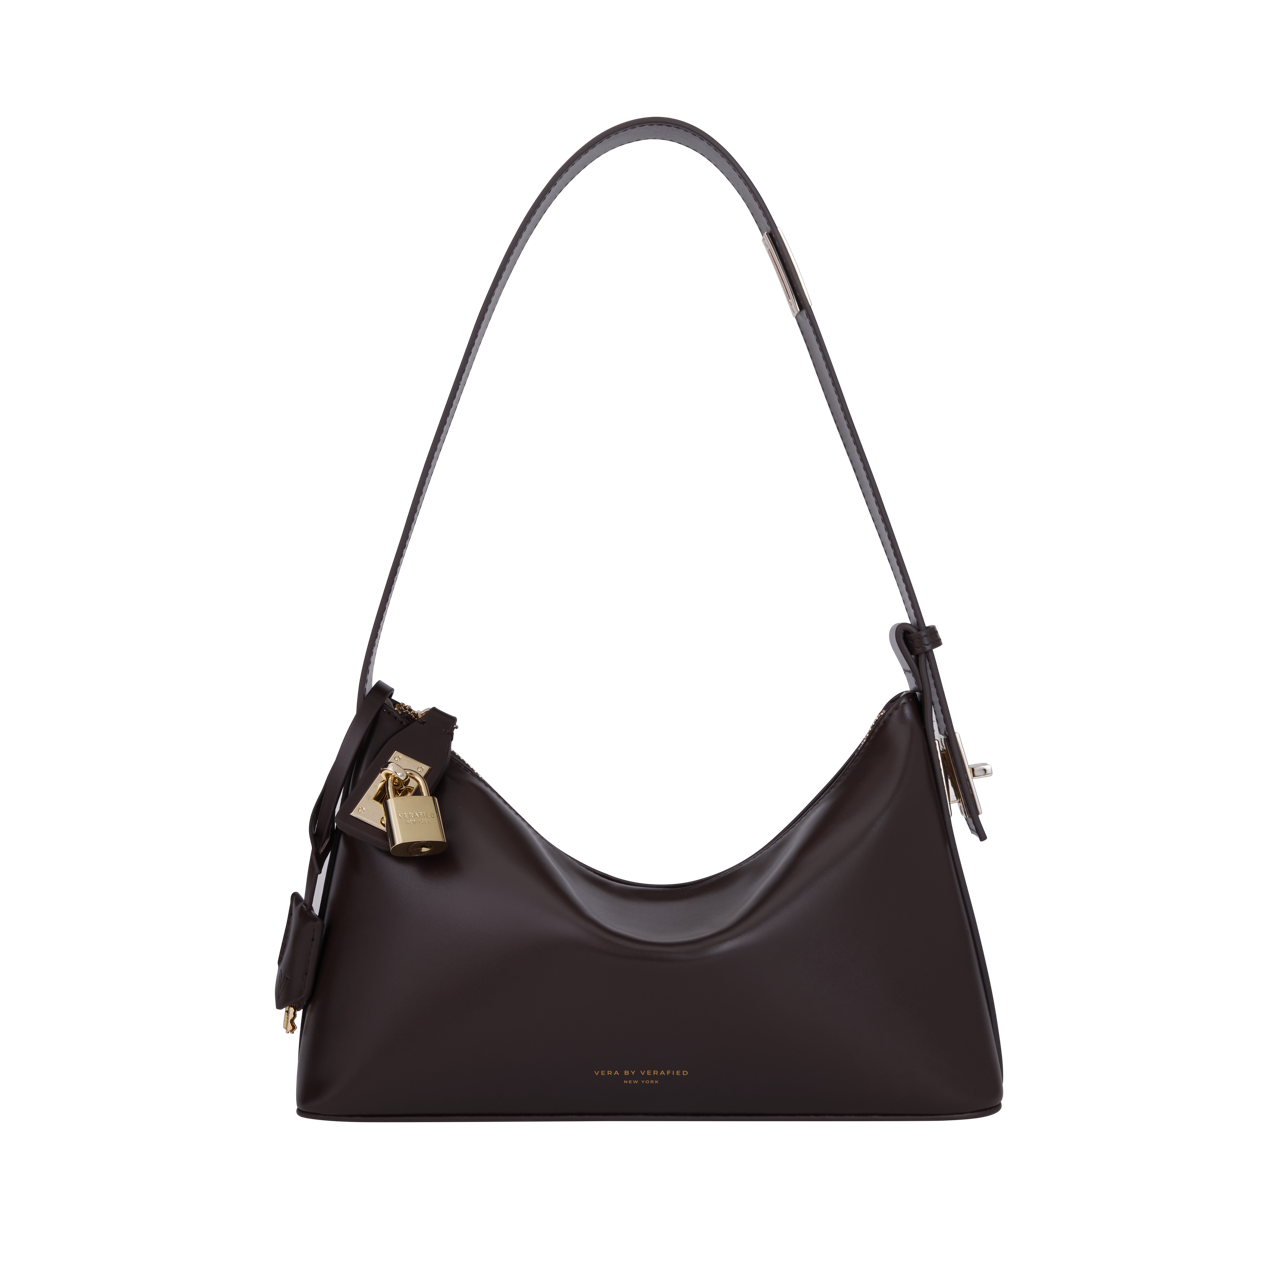 Gold Chocolate Hobo Bag（Pre-Order Only. Will Ship Late May-Early June)